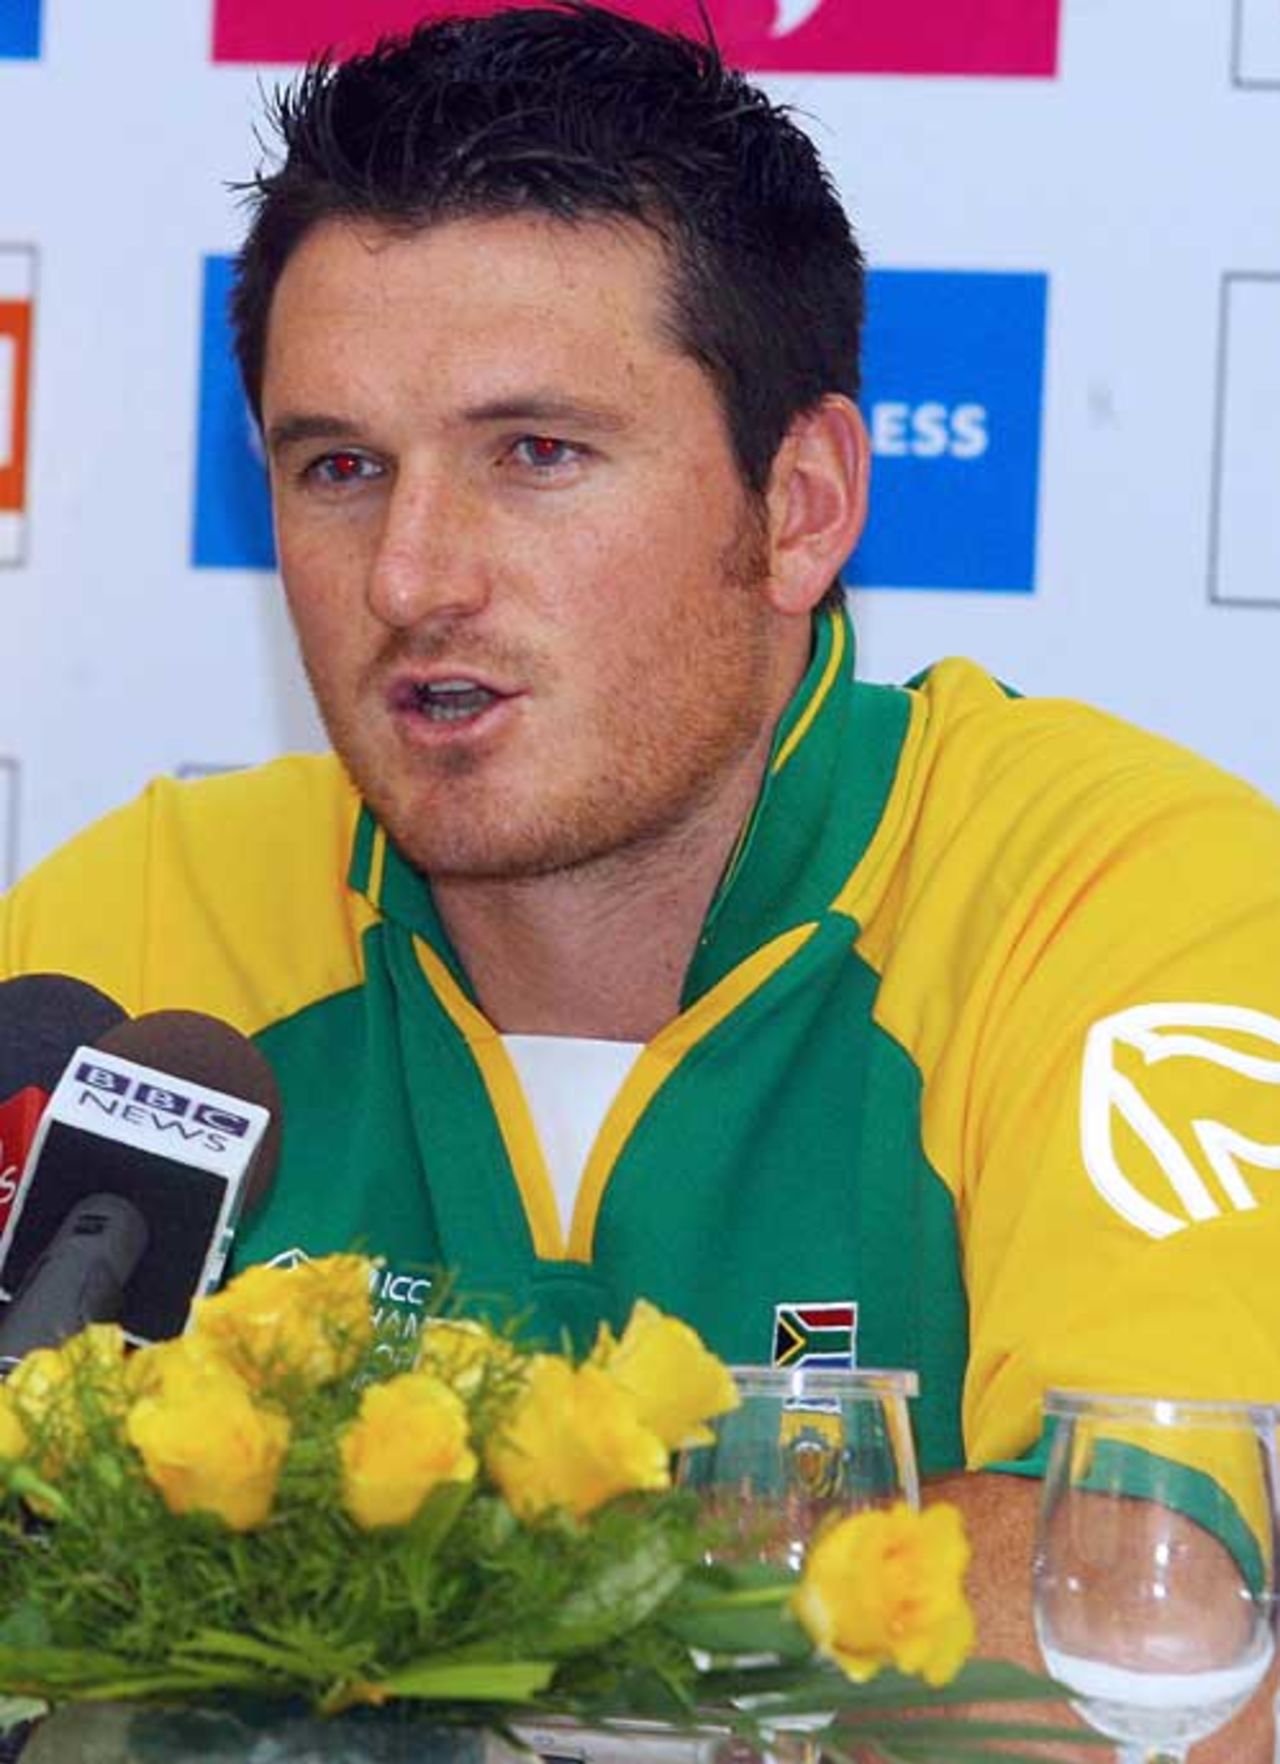 Graeme Smith speaks to the media after arriving in India, New Delhi, October 6, 2006